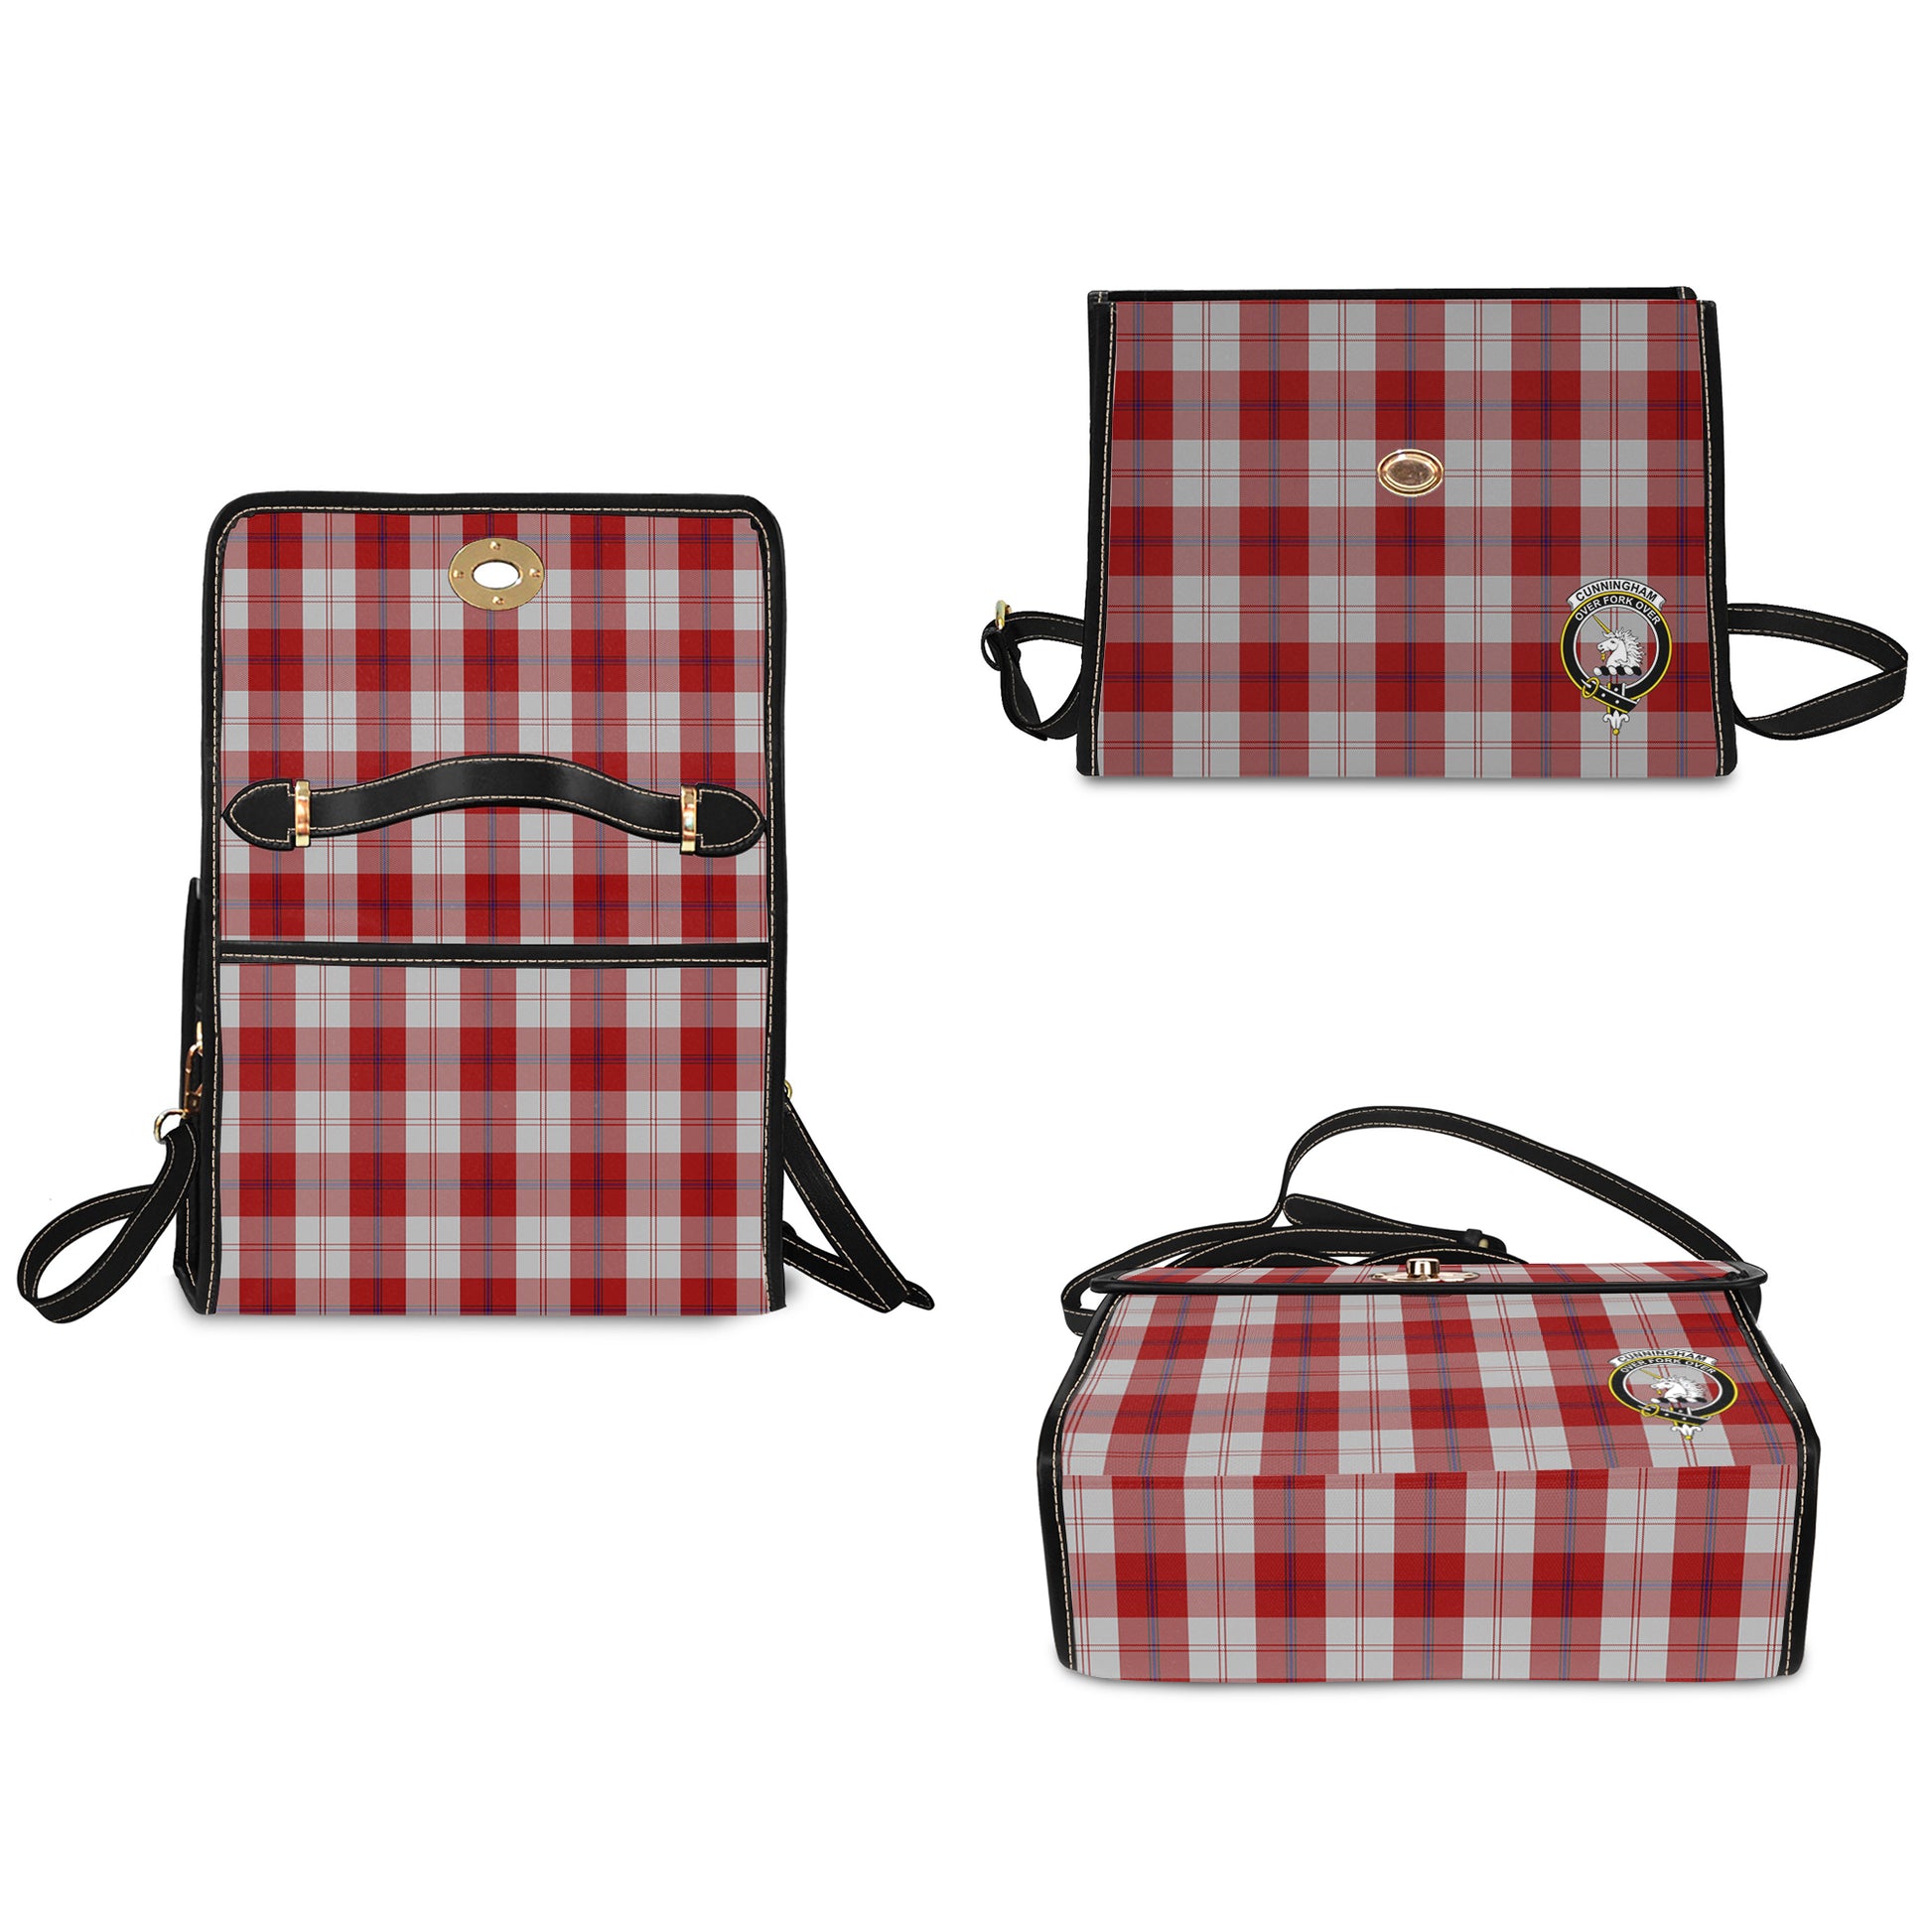 cunningham-dress-tartan-leather-strap-waterproof-canvas-bag-with-family-crest